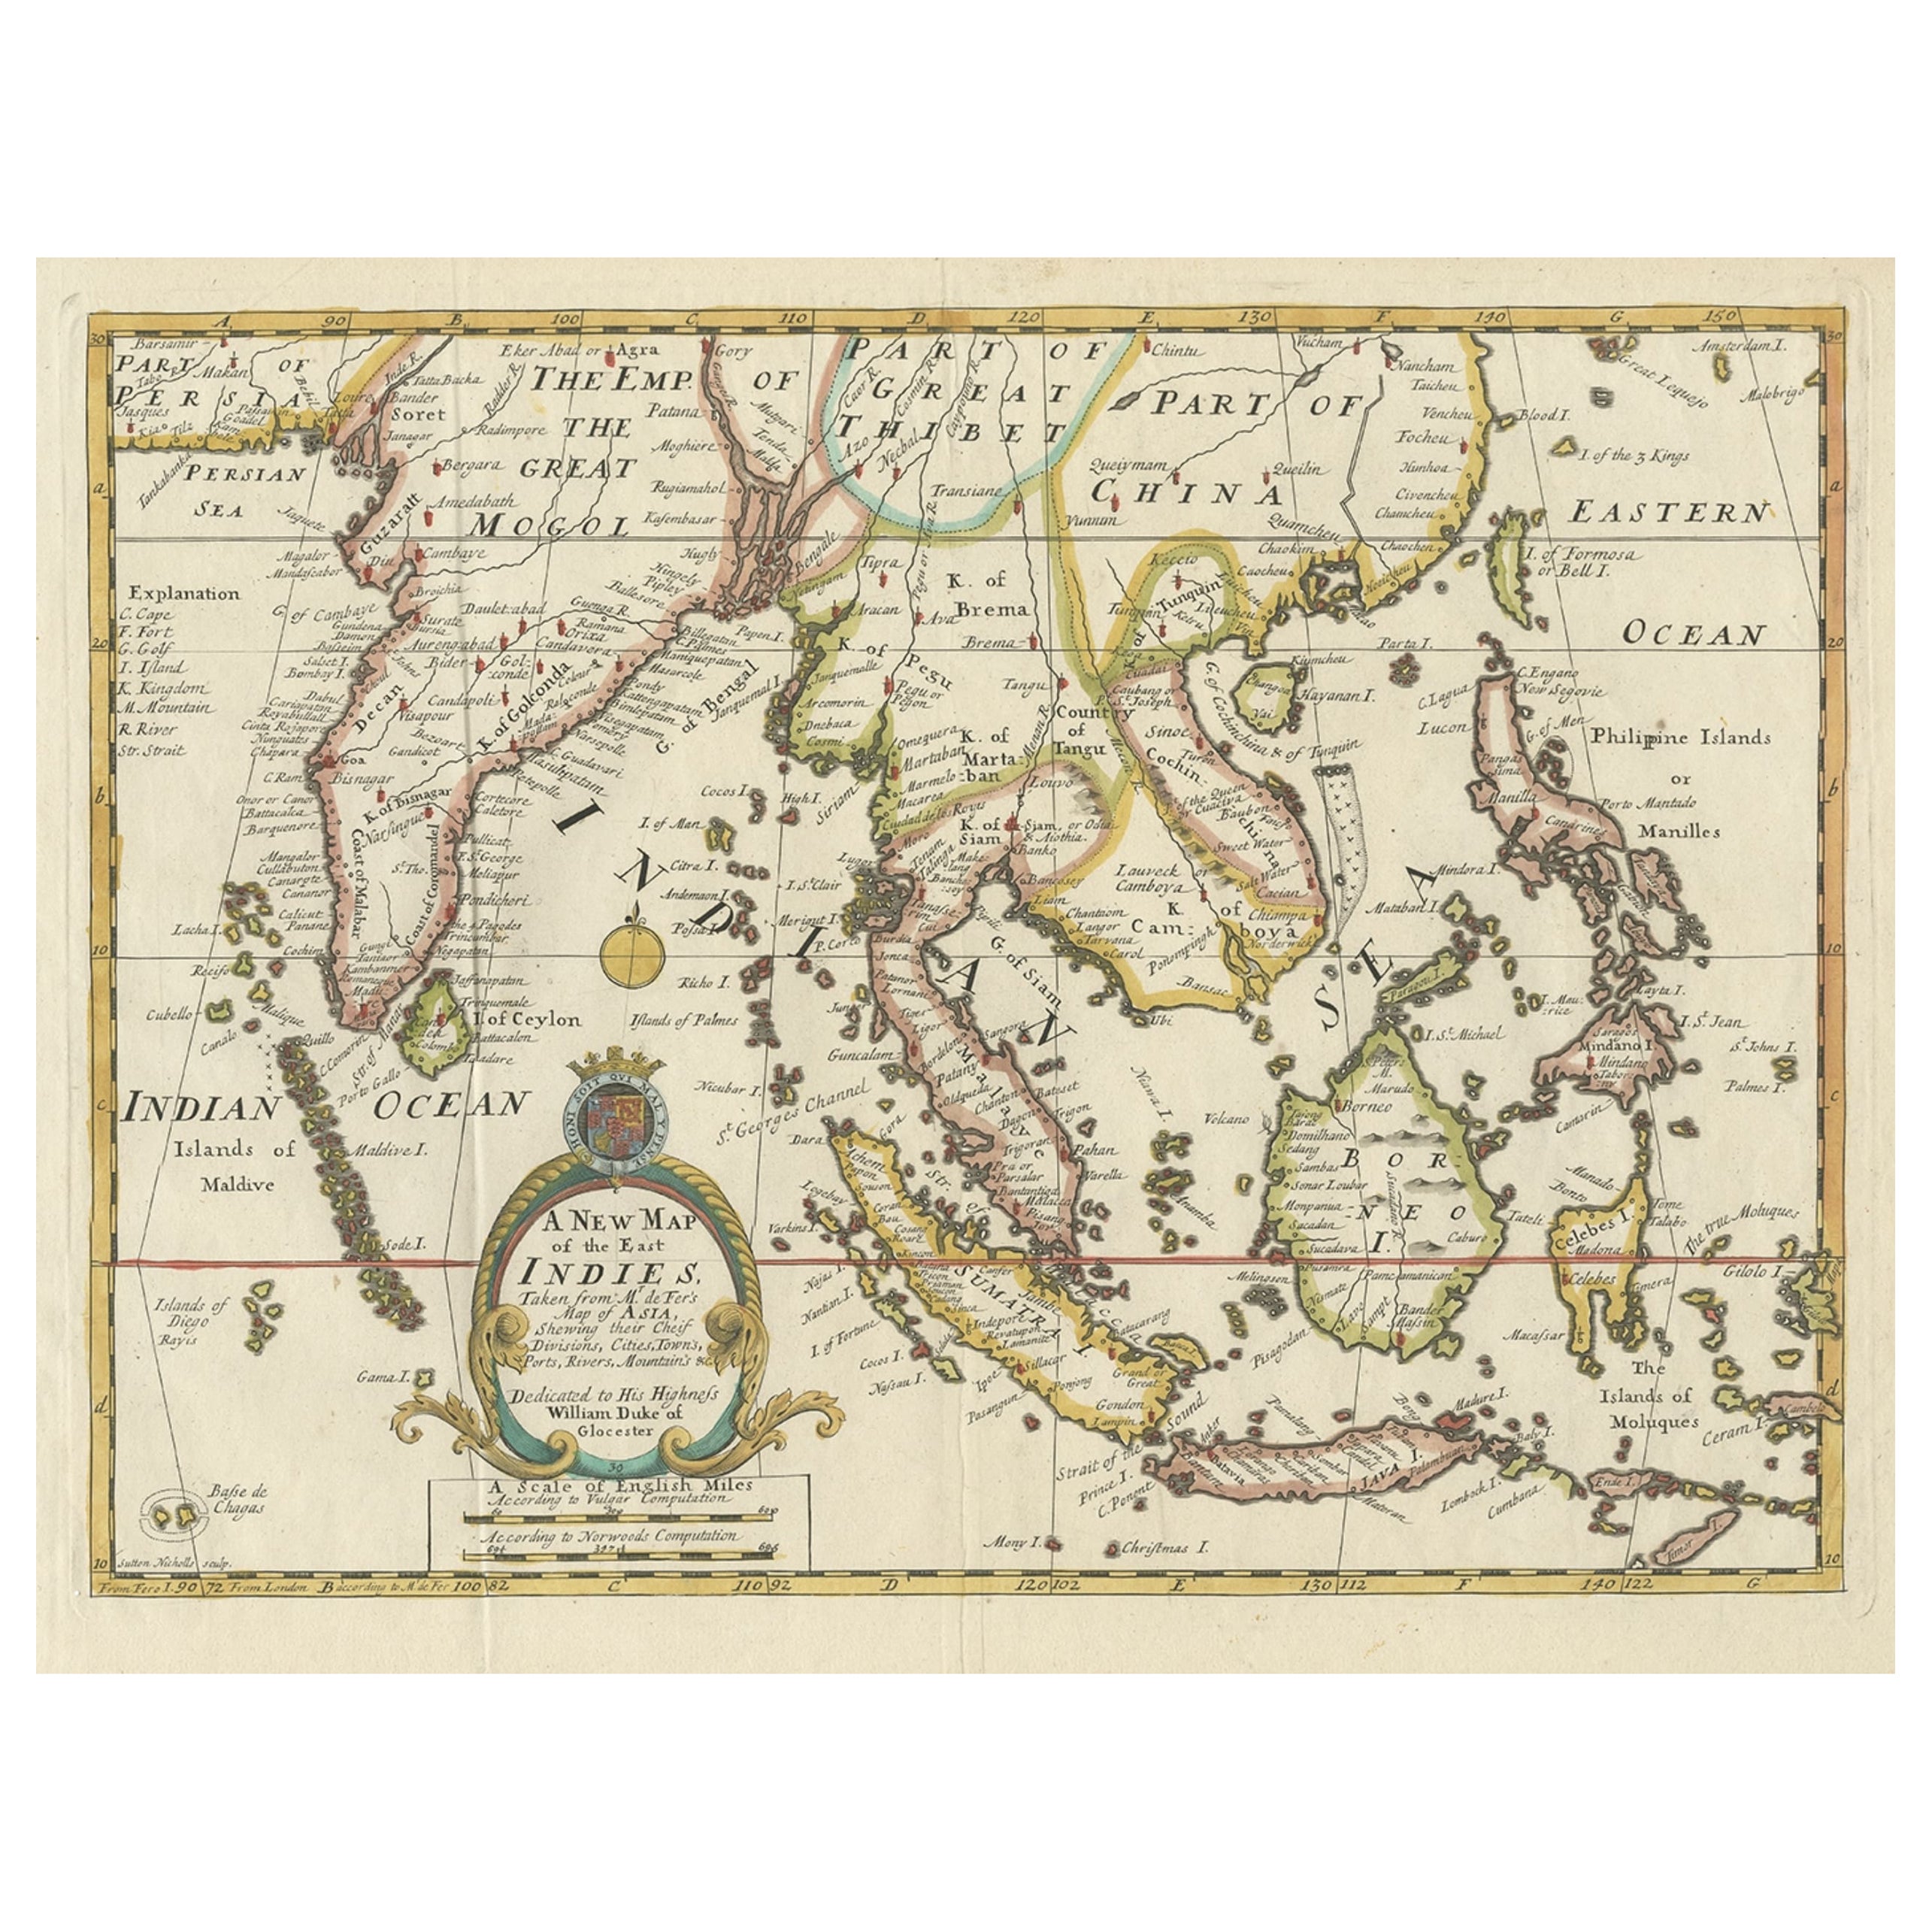 Old Map Covering All of Southeast Asia from Persia to the Timor Island, 1712